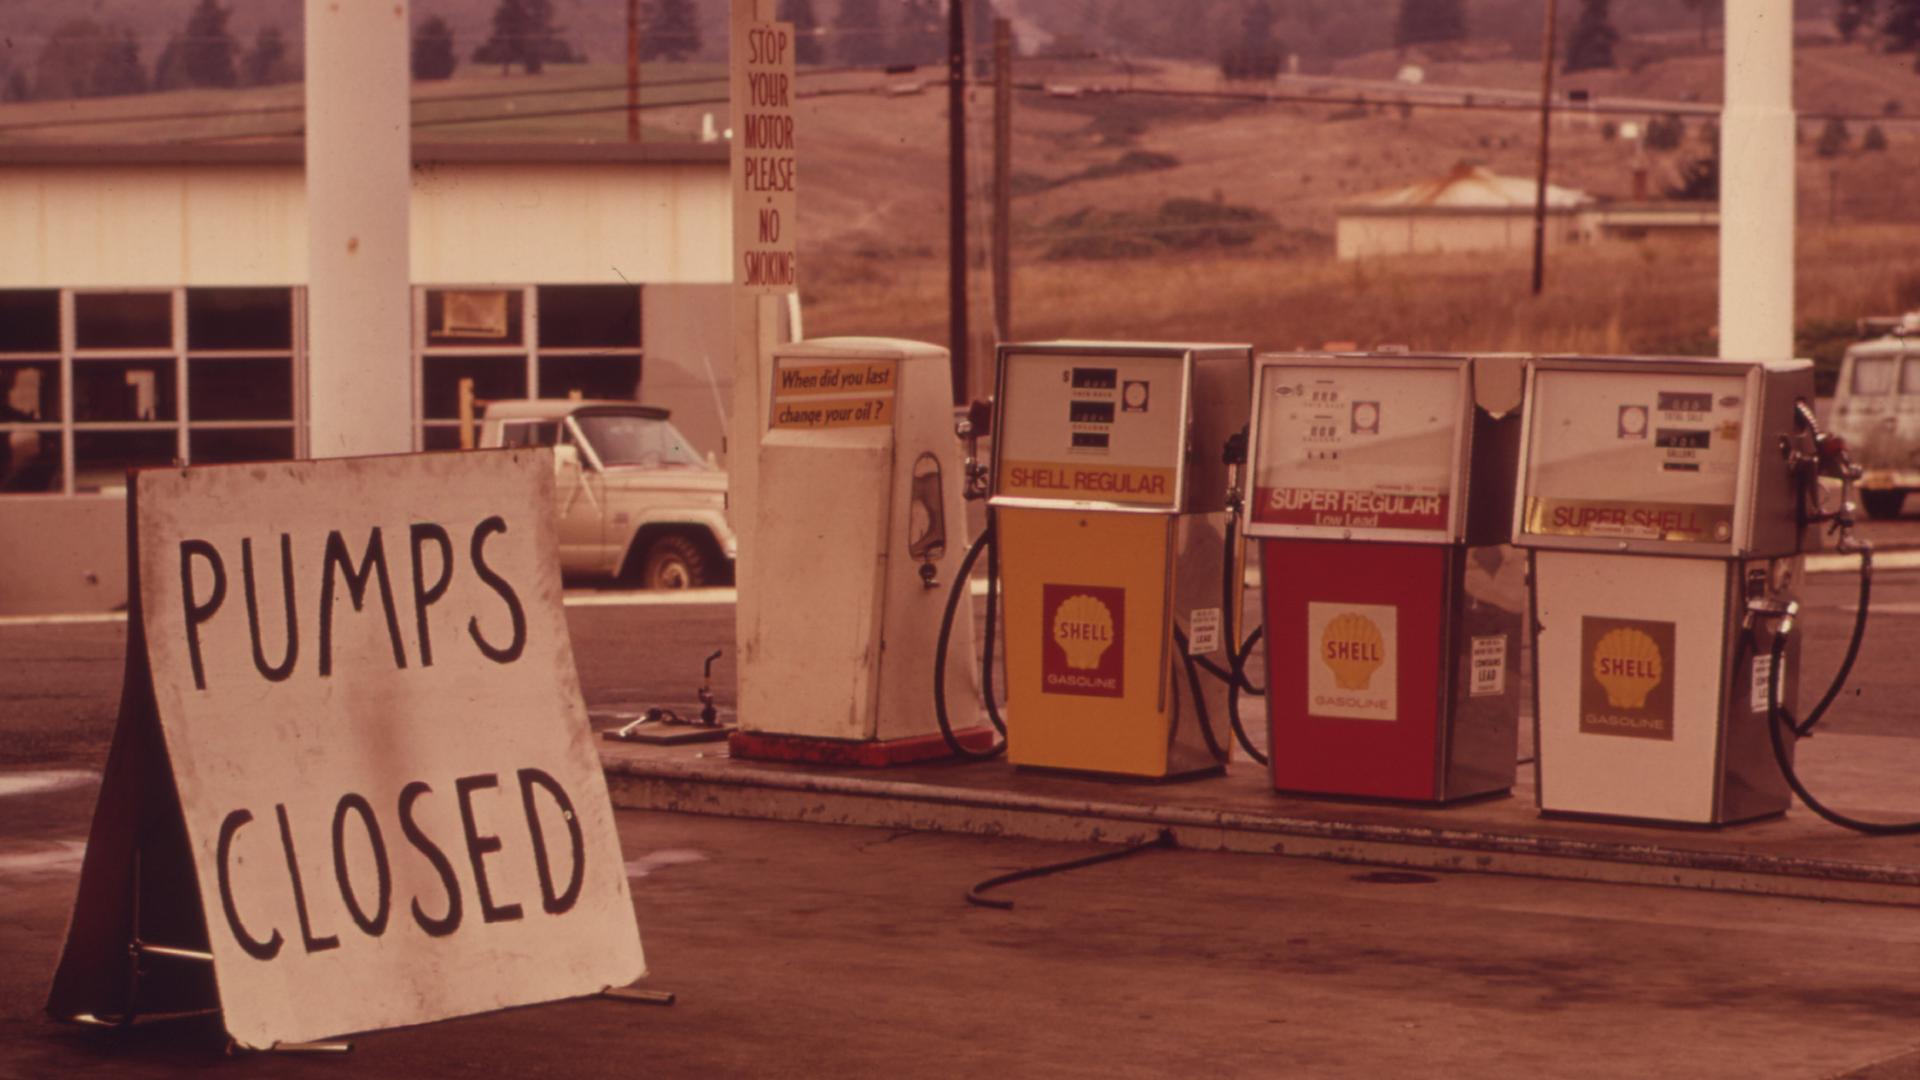 Gasoline shortages prompted by the Arab Oil Embargo hit this station near Interstate 5 in Oregon in October, 1973. The embargo roiled the US economy through the winter of 1973-74, before it was lifted on March 17, 1974.